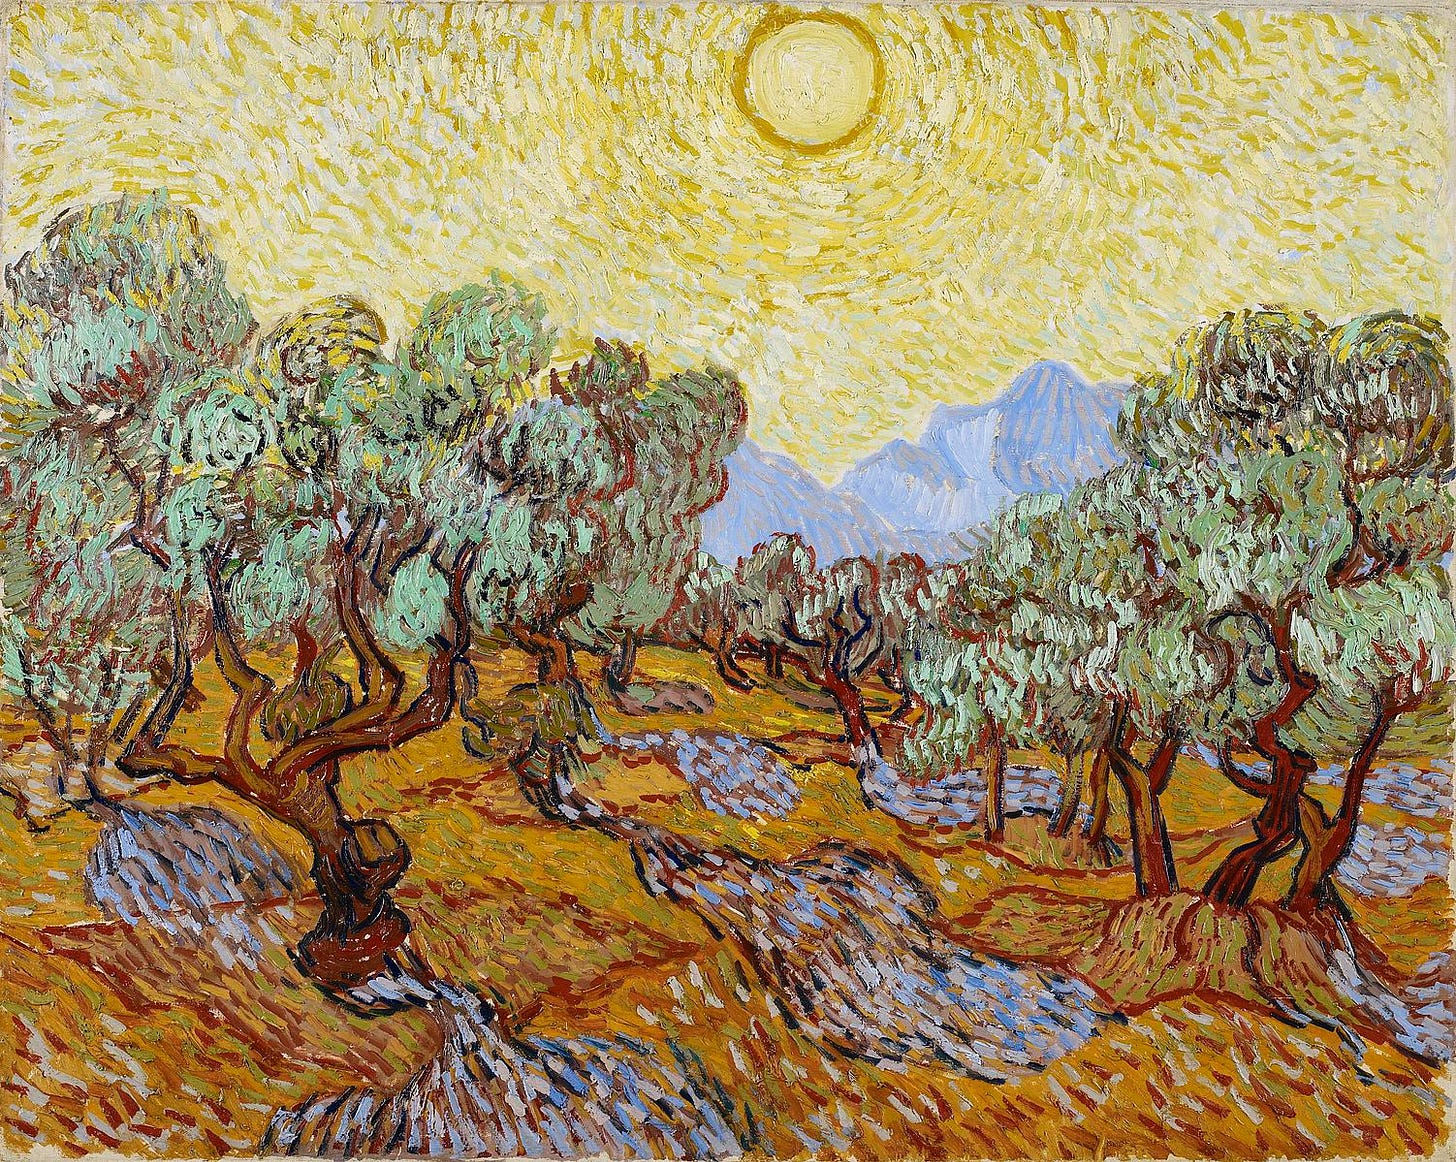 a famous Van Gogh with olive trees and a yellow sky, which he painted during his time at the asylum in St. Remy